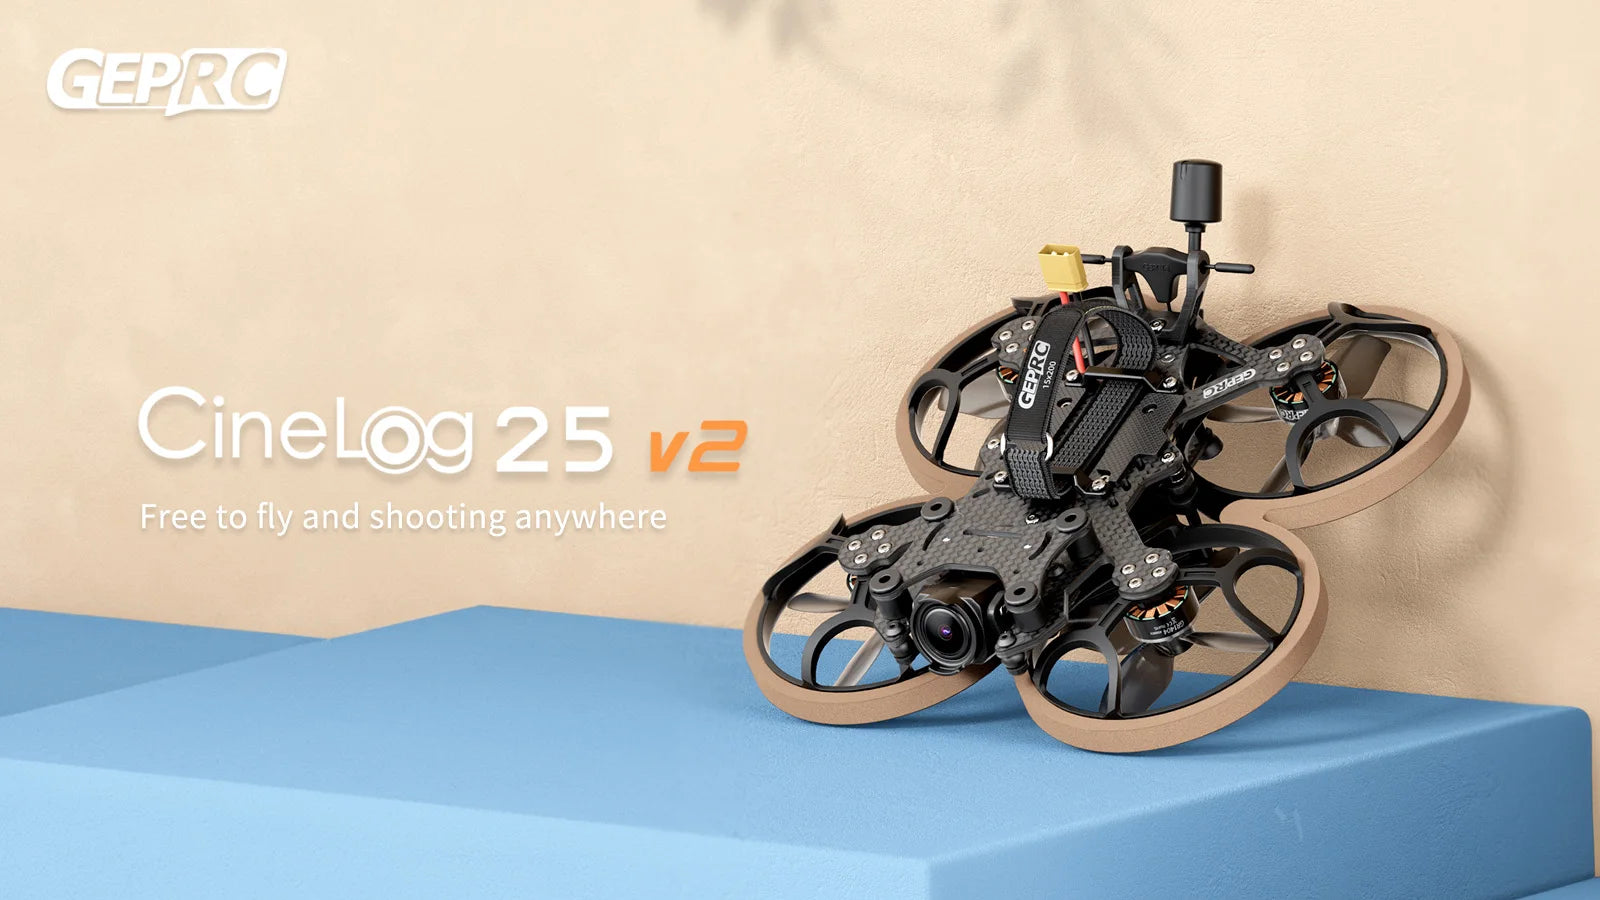 GEPRC Cinelog25 V2 HD Wasp FPV, @CERC Cinelog25 v2 Free to fly and shooting anywhere